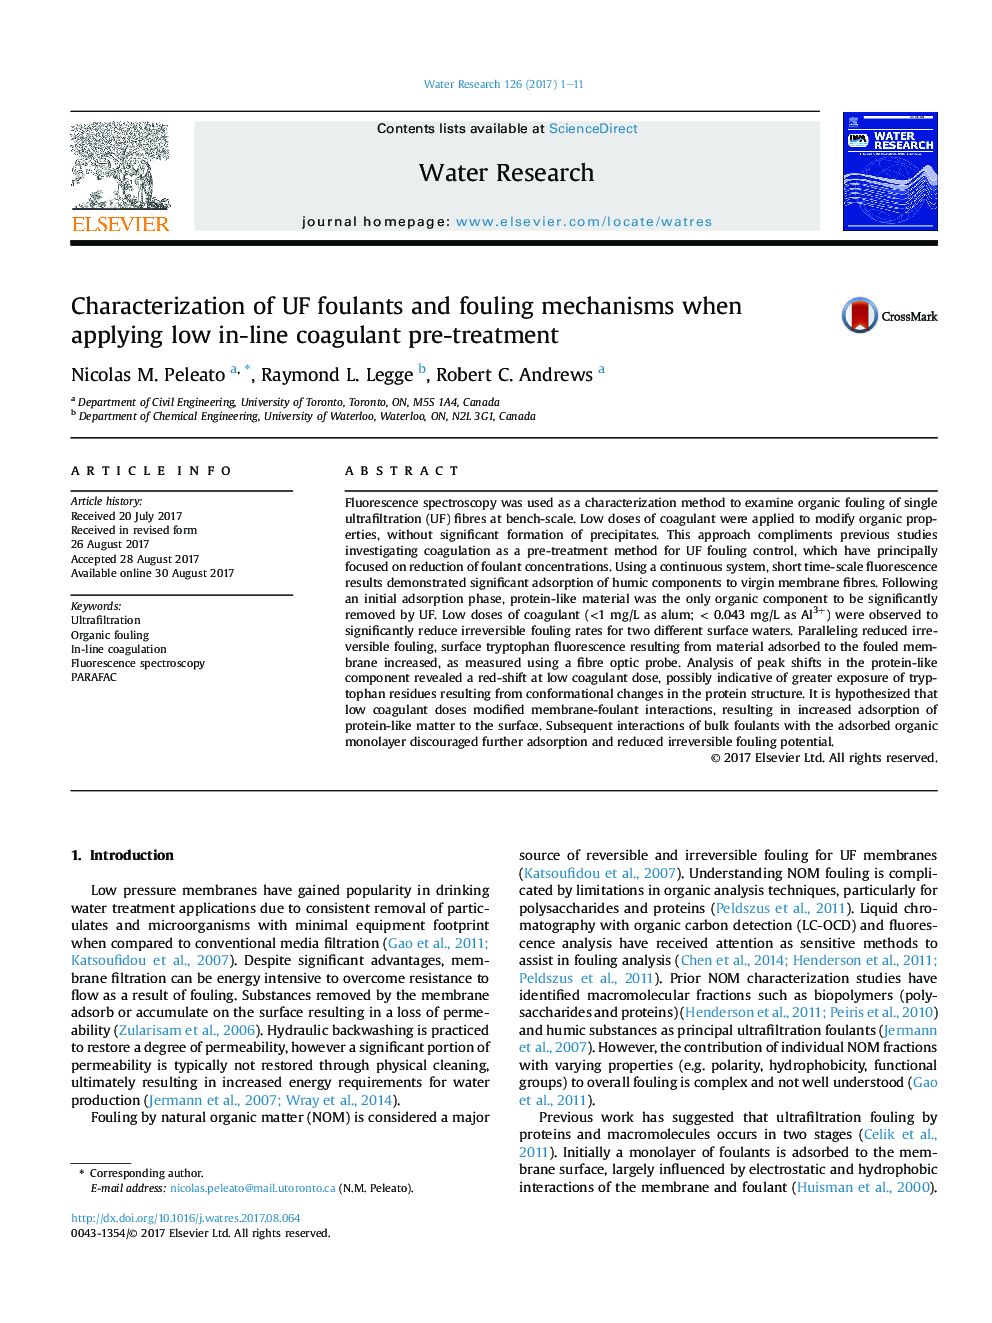 Characterization of UF foulants and fouling mechanisms when applying low in-line coagulant pre-treatment